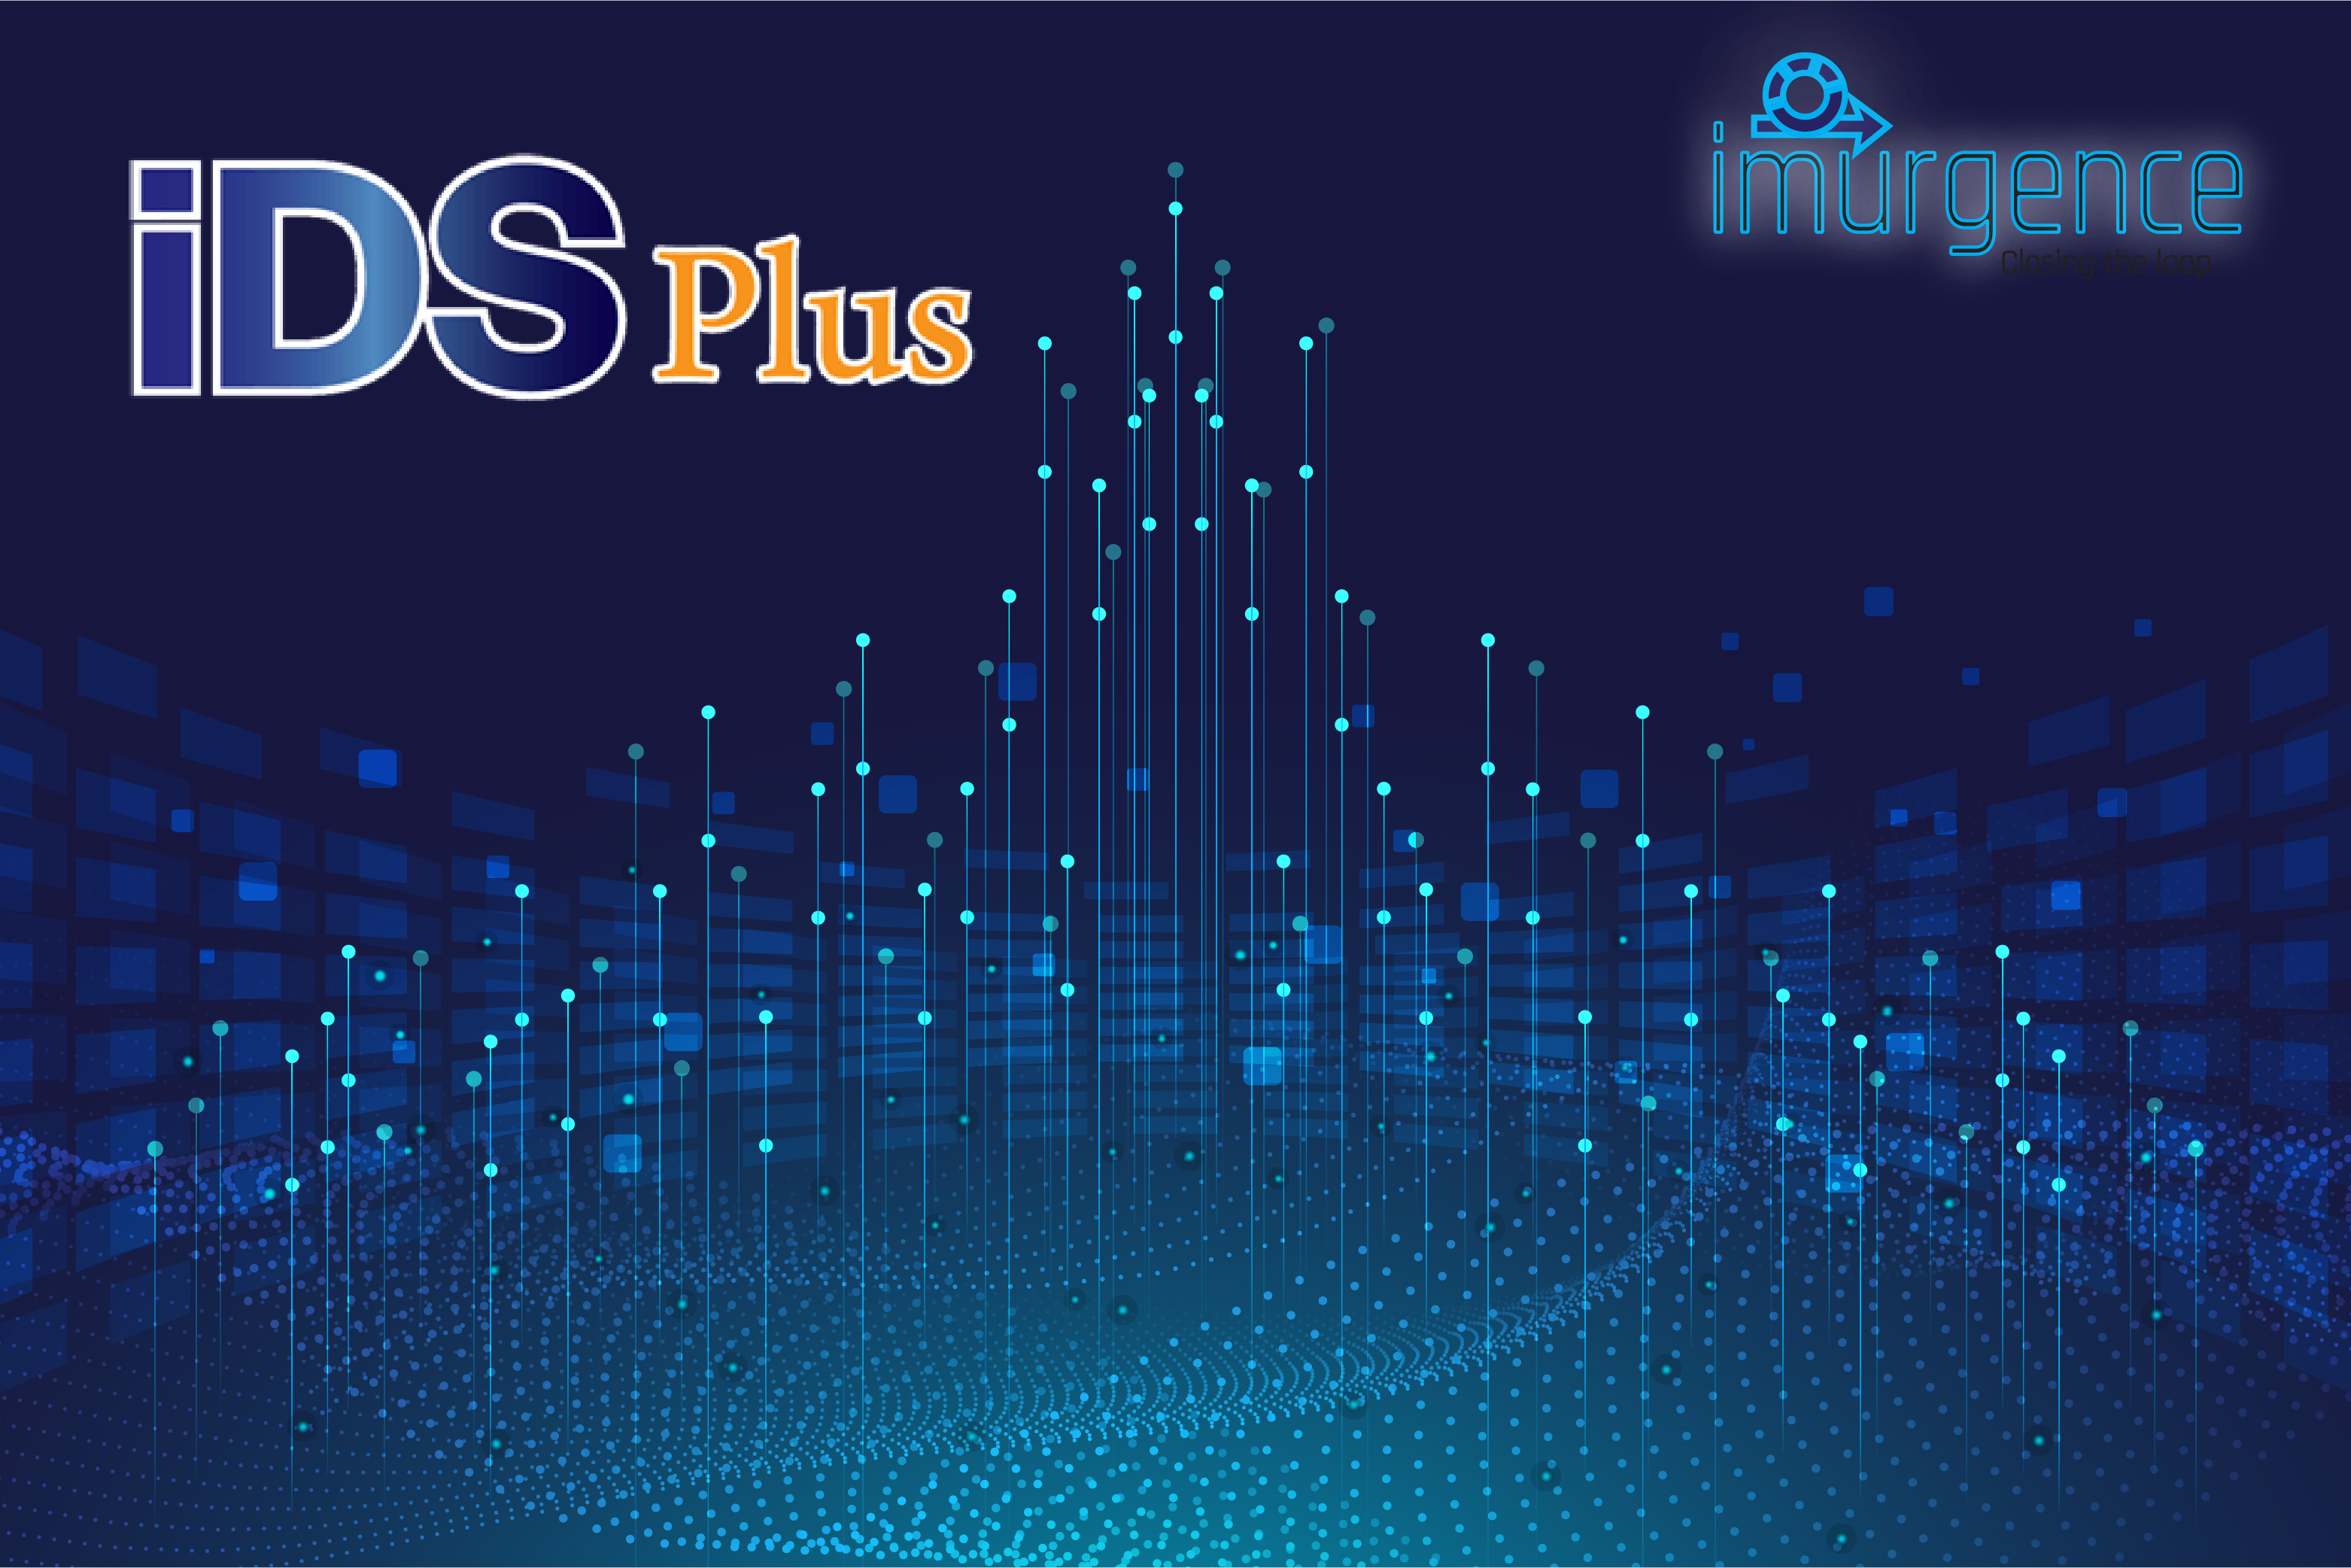 iDS Plus : Certificate Program in Data Science & Advanced Machine Learning using R & Python